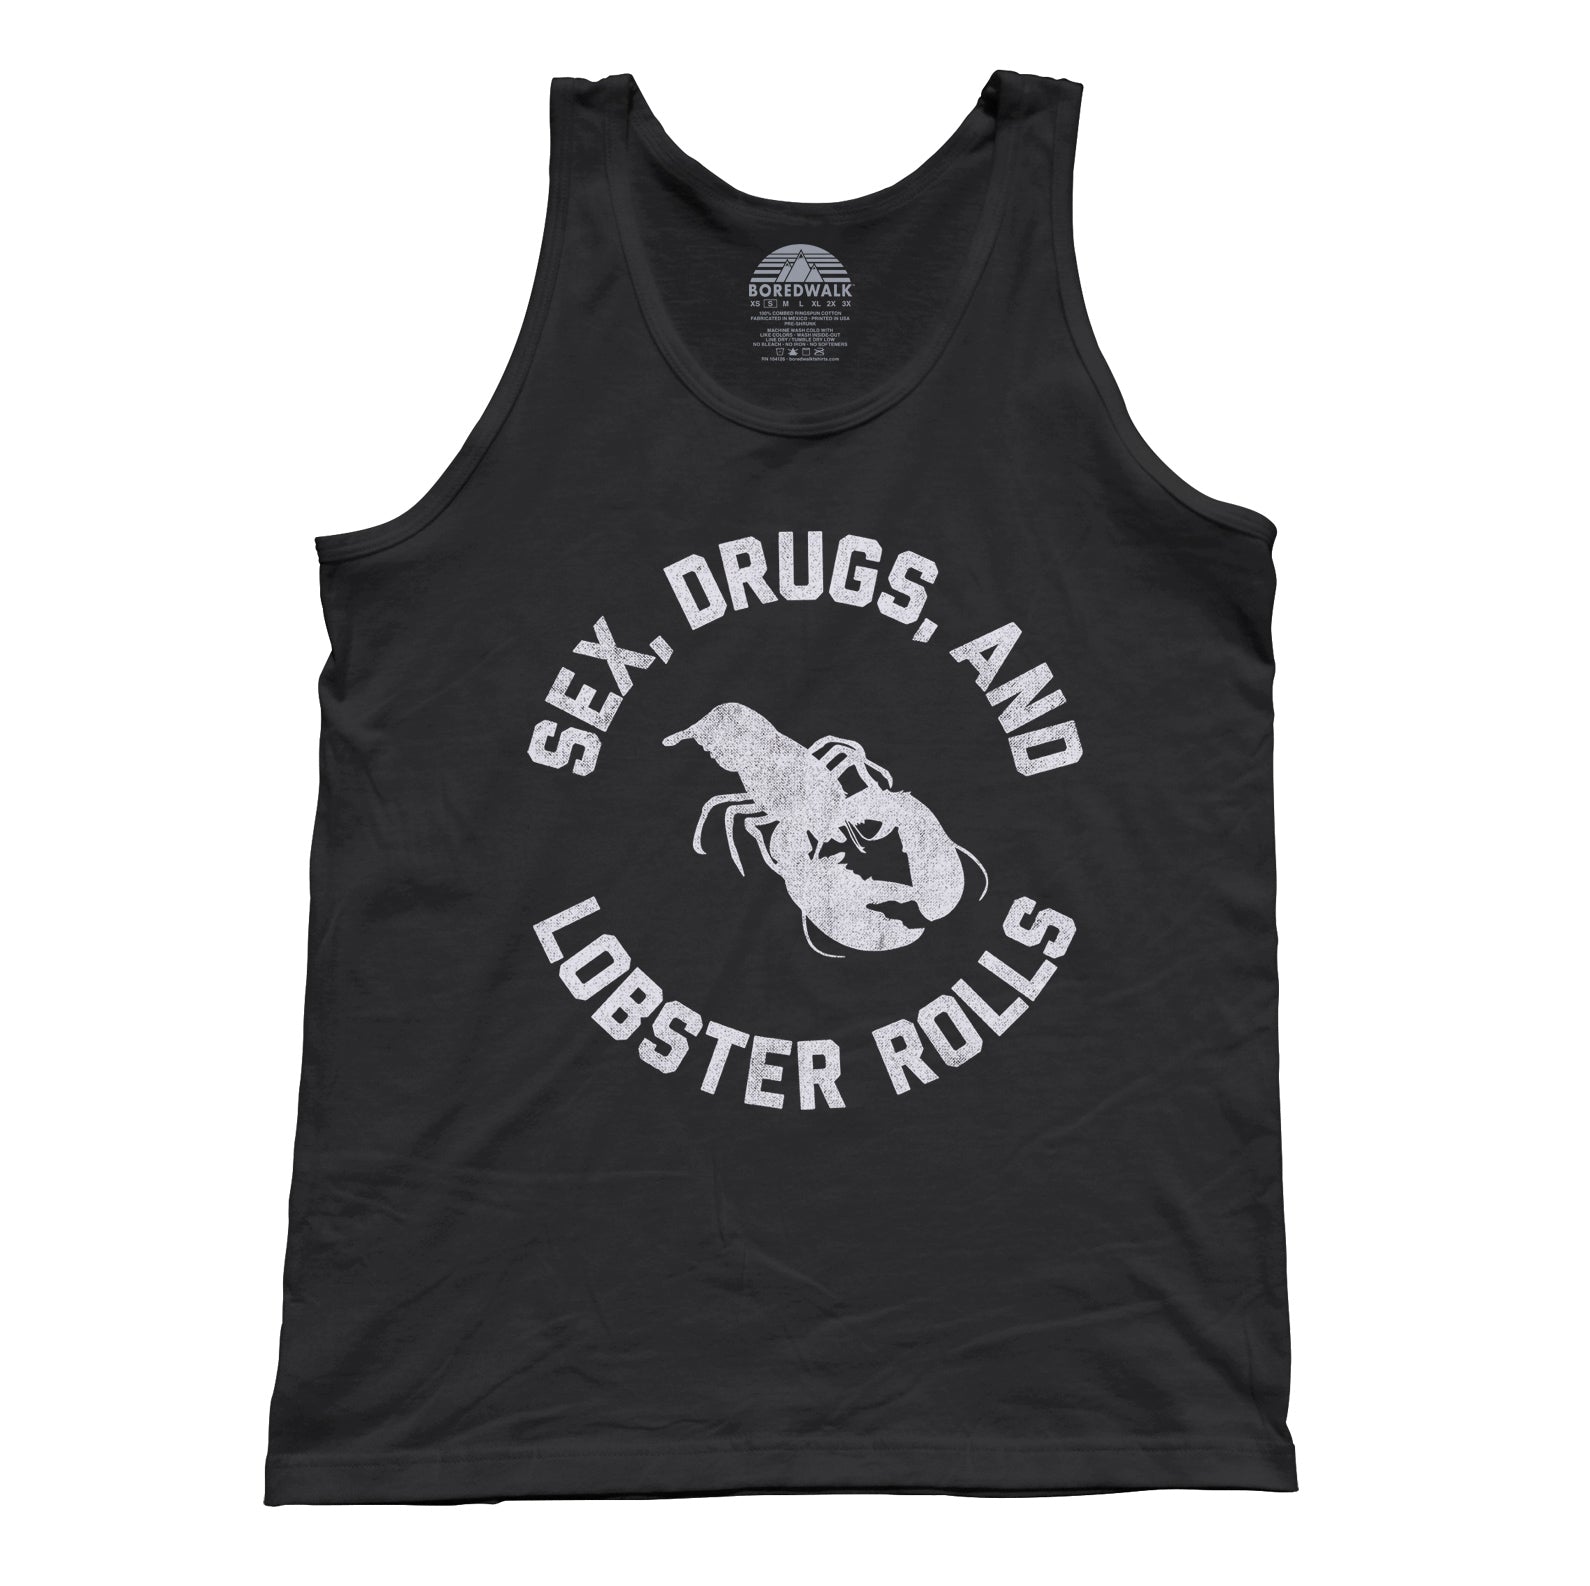 Unisex Sex Drugs and Lobster Rolls Tank Top